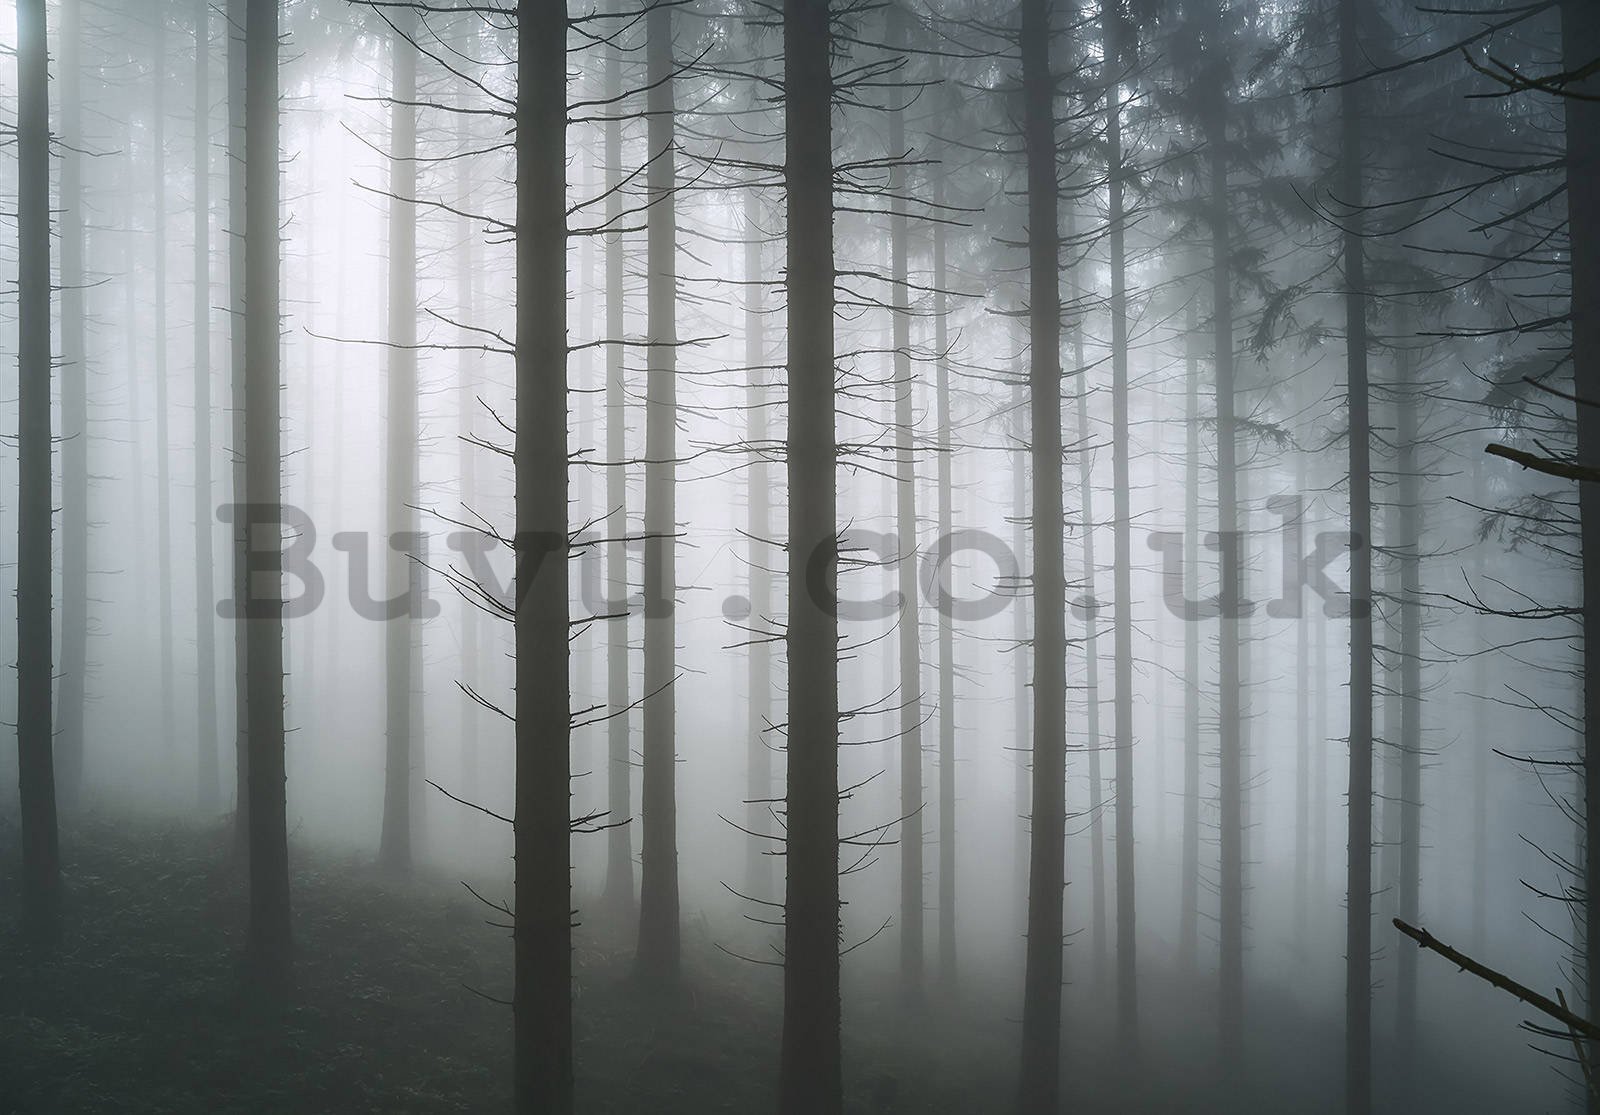 Wall mural vlies: Haunted Forest (1) - 368x254 cm